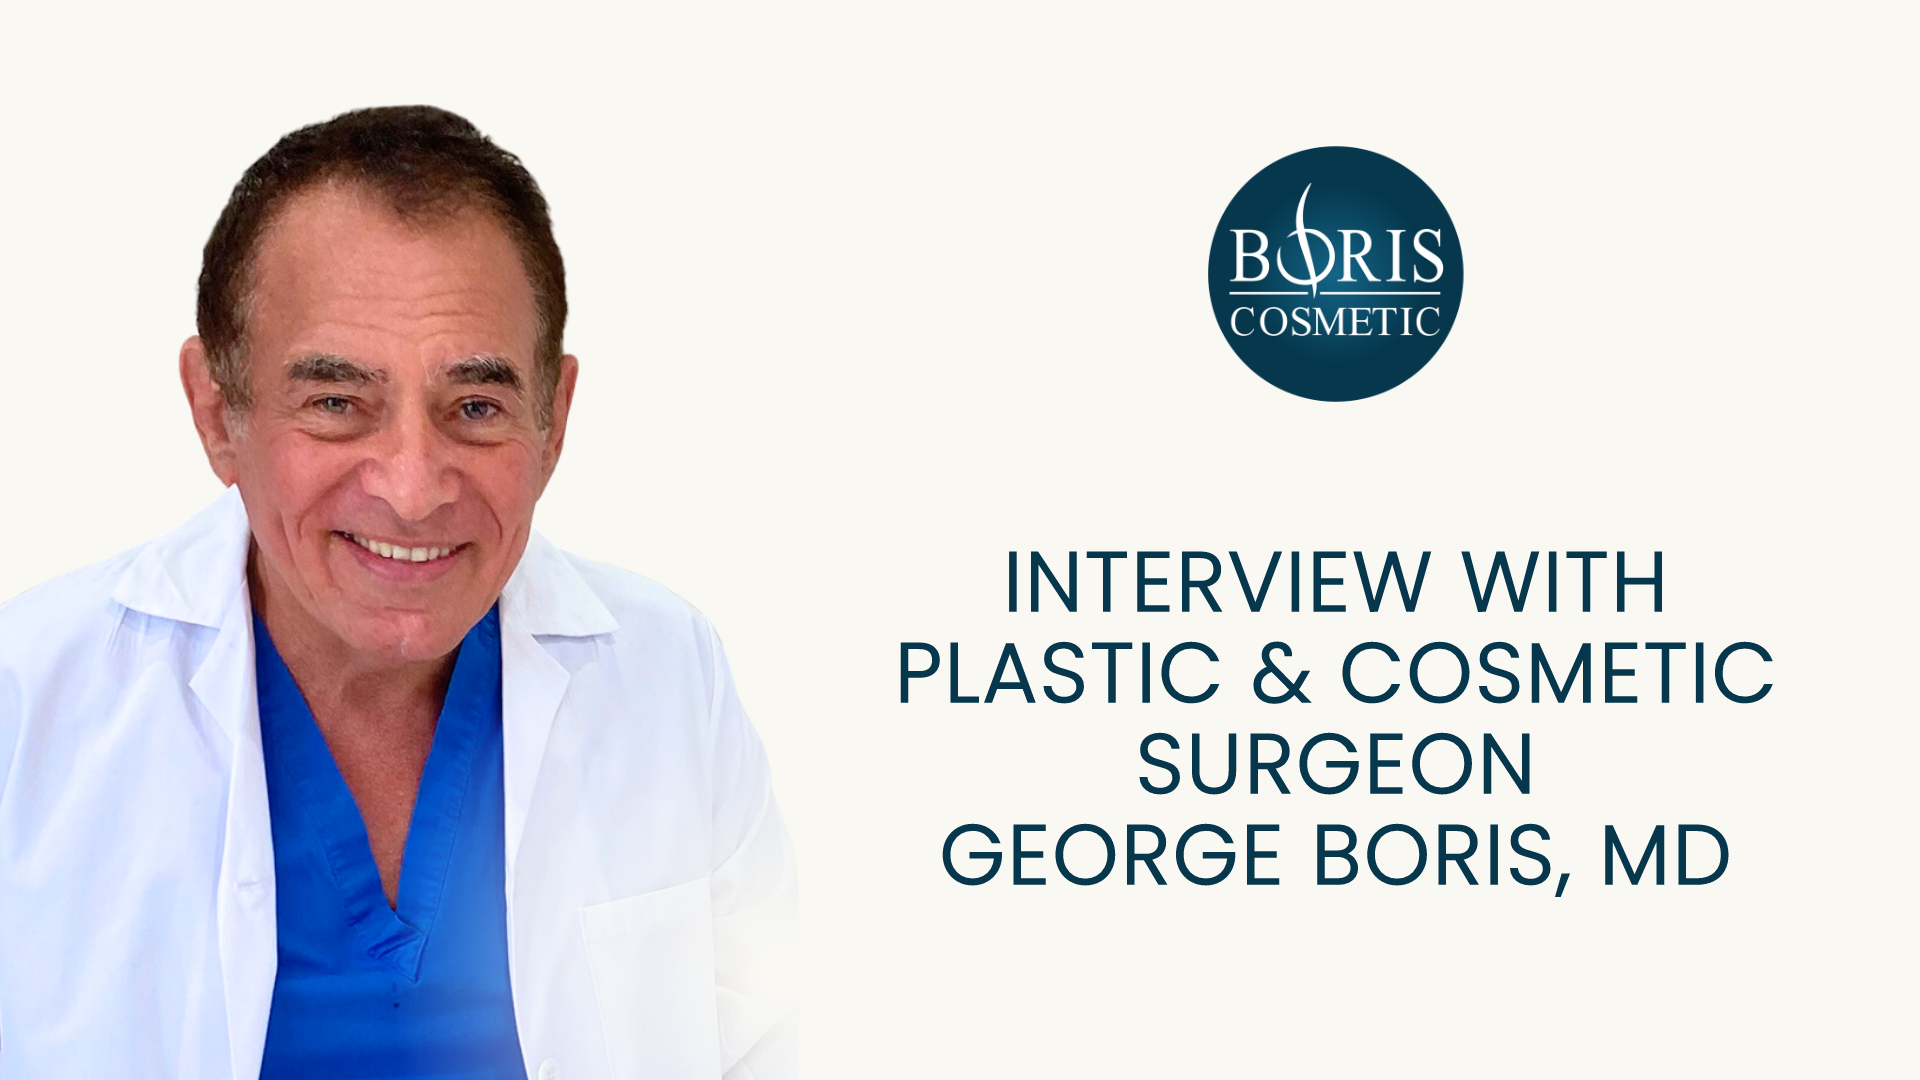 Interview with Plastic; Cosmetic Surgeon George Boris, MD